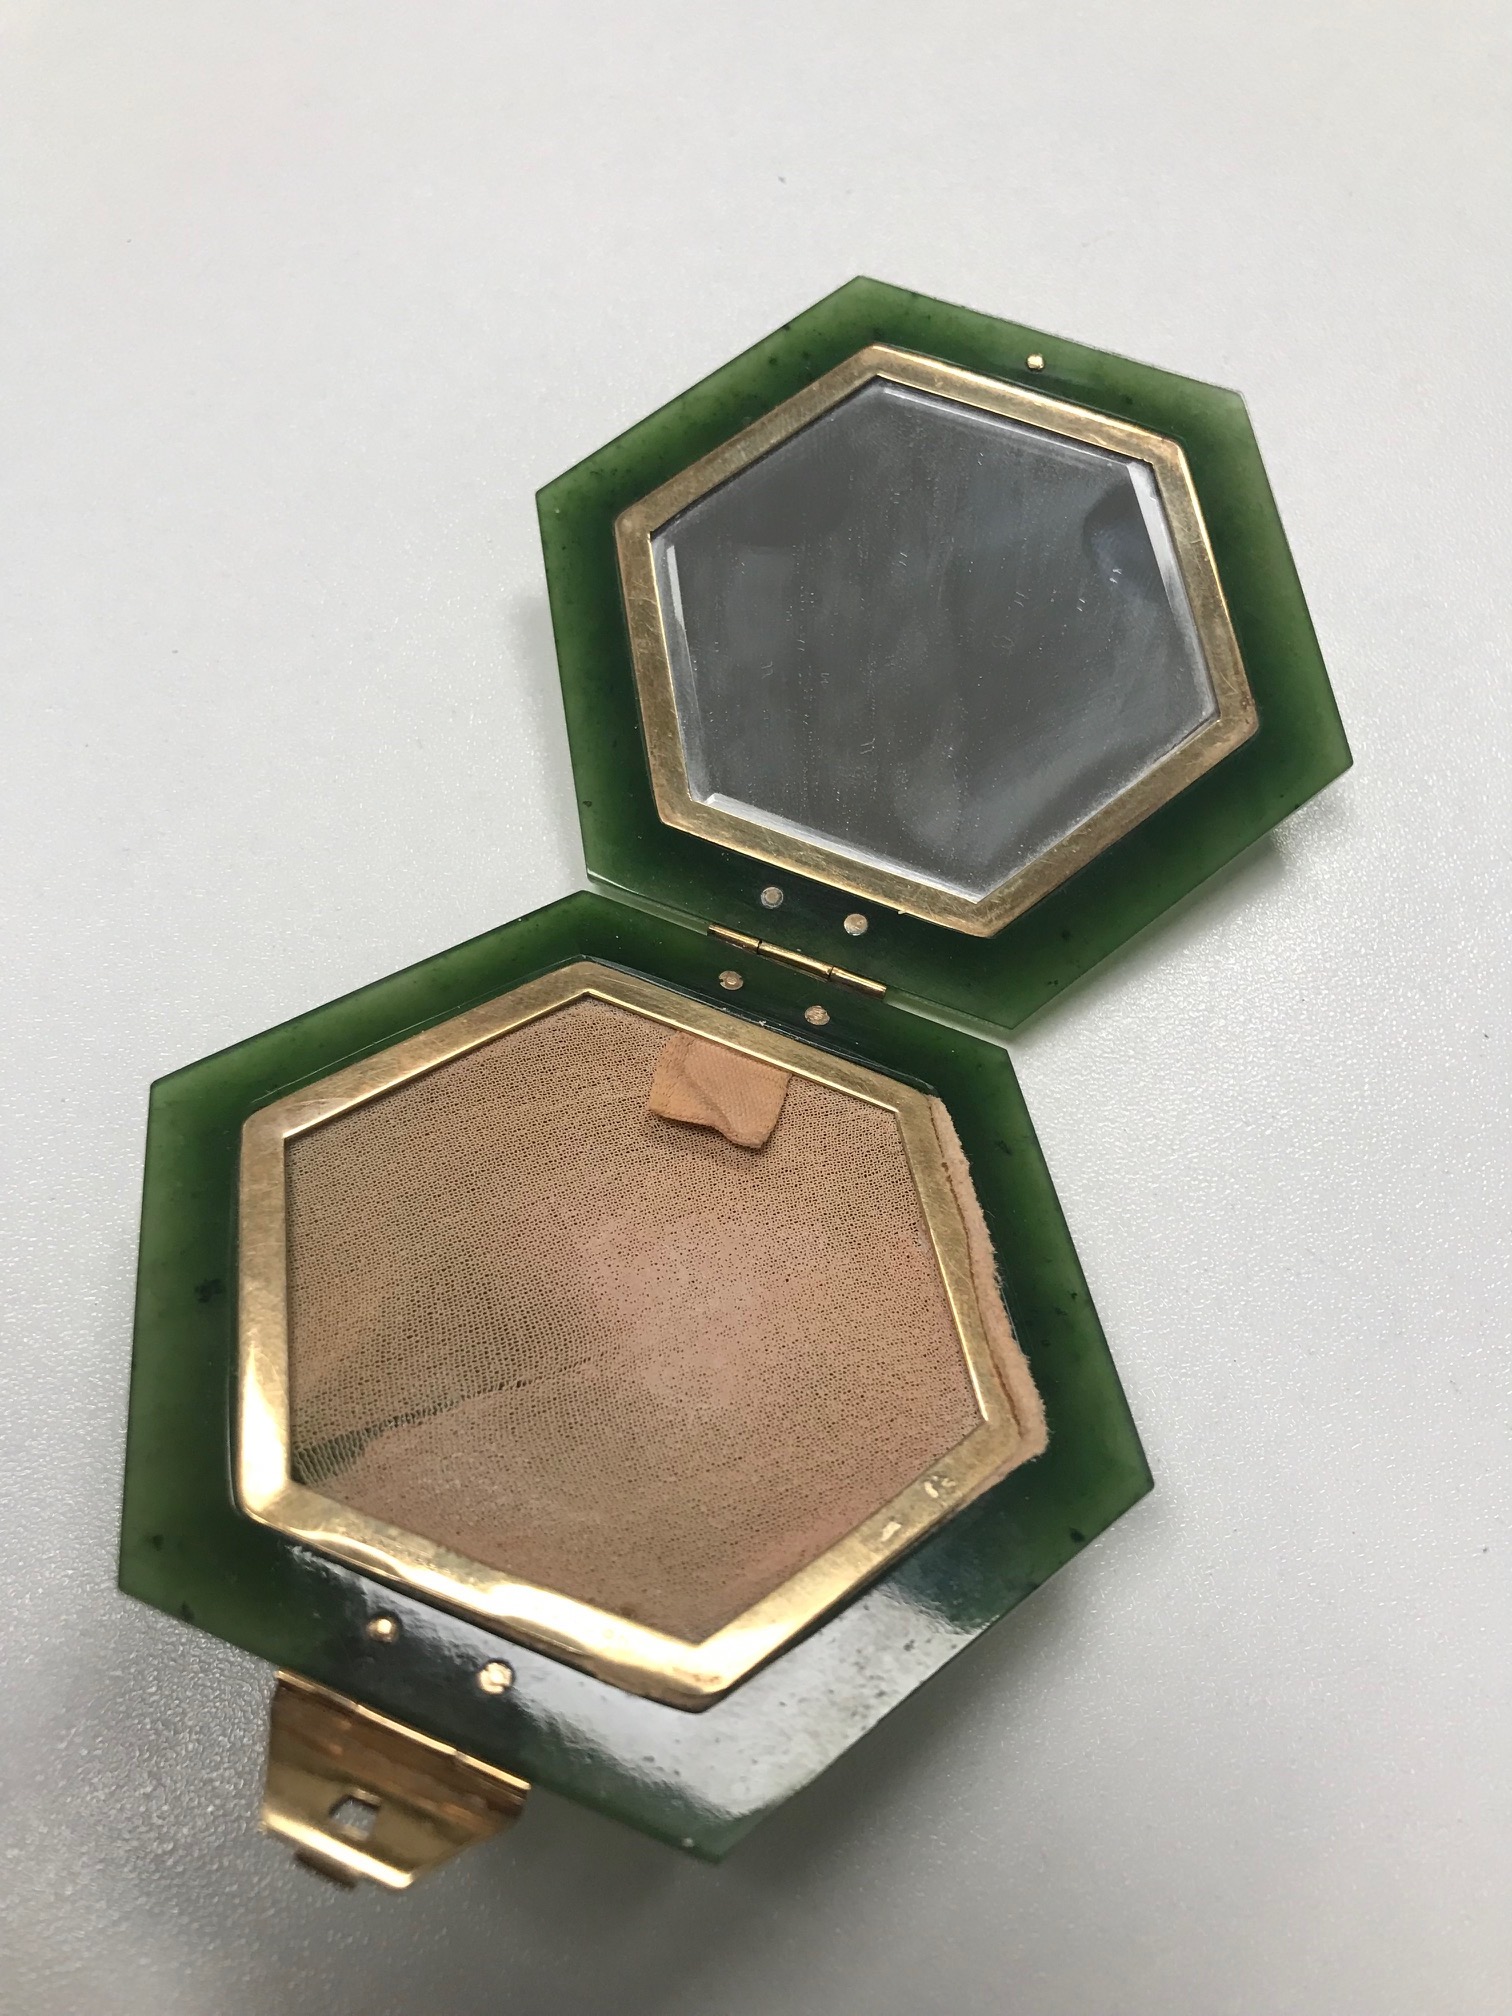 An Art Deco Dunhill nephrite powder compact - Image 7 of 7